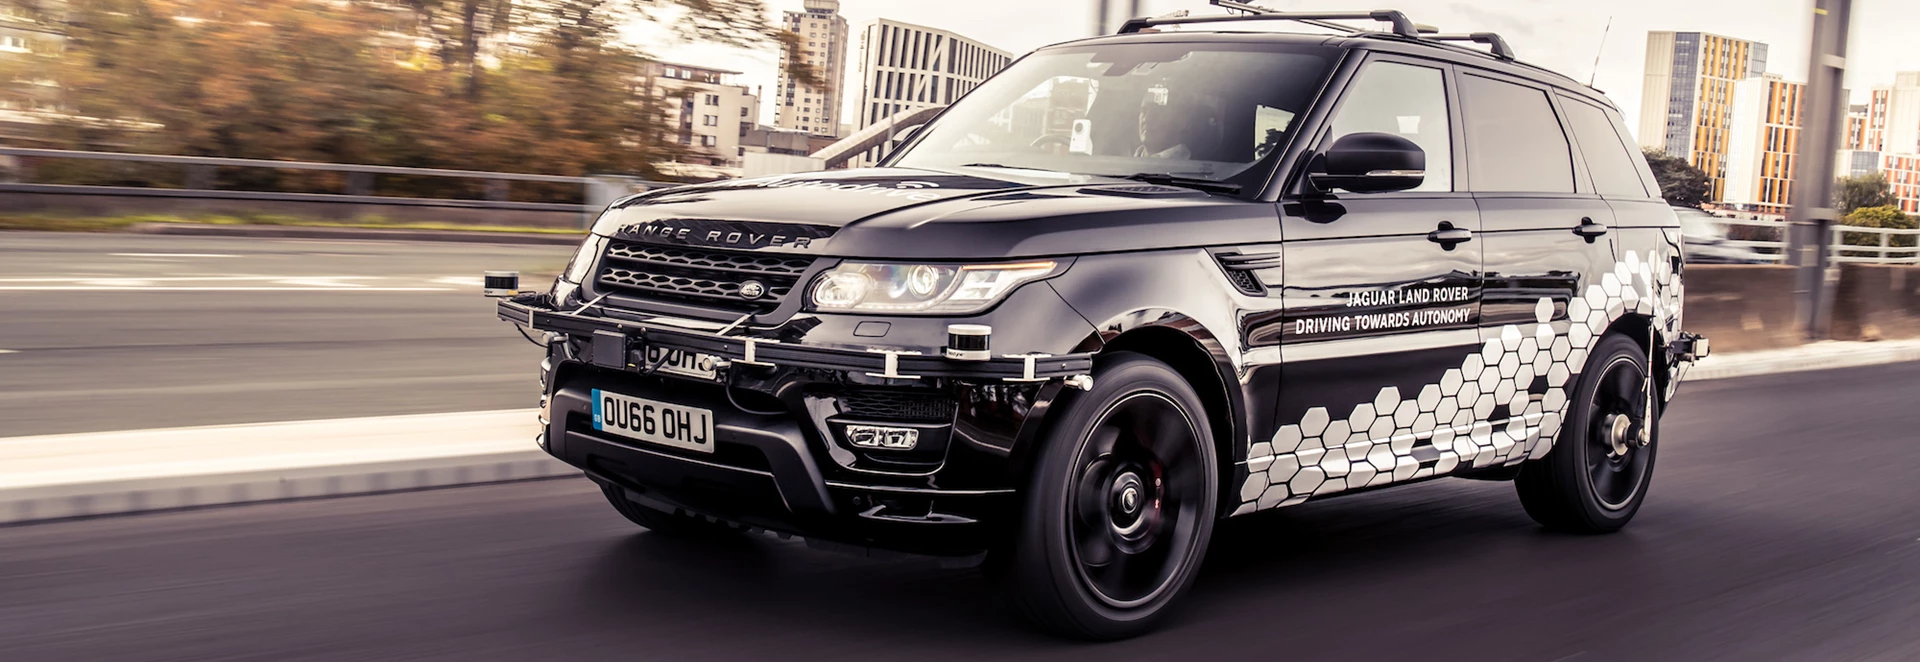 Autonomous Range Rover completes lap of Coventry Ring Road